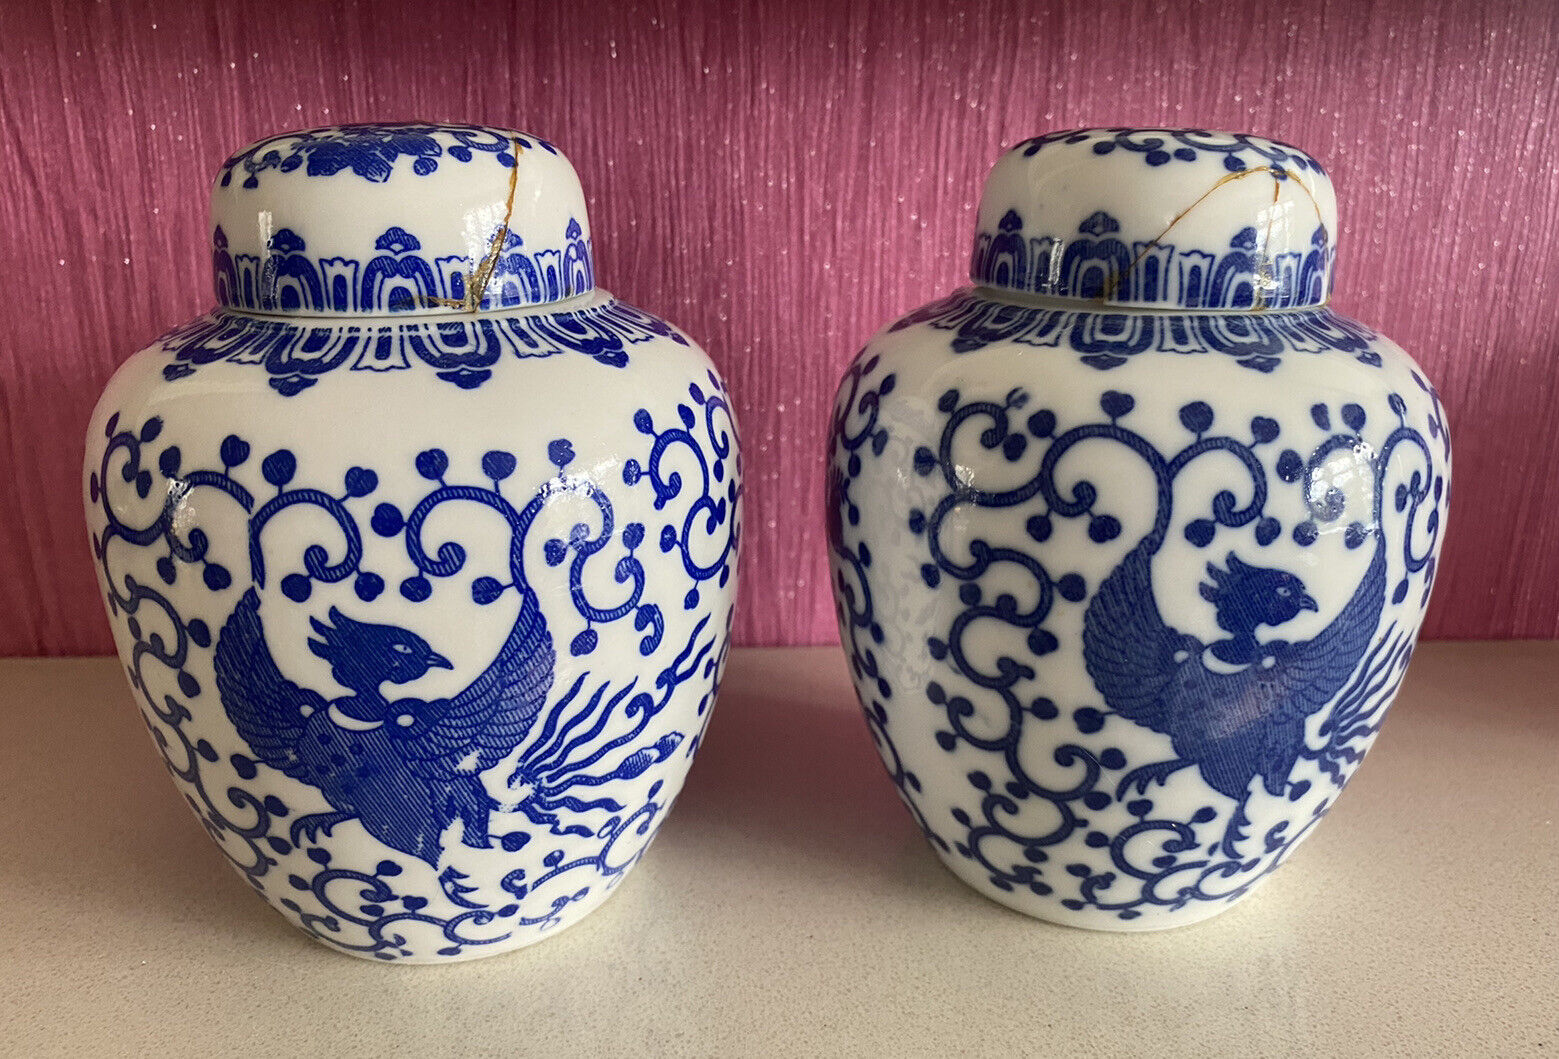 Antique Valuations: Pair of vintage Chinese ginger jars blue and white